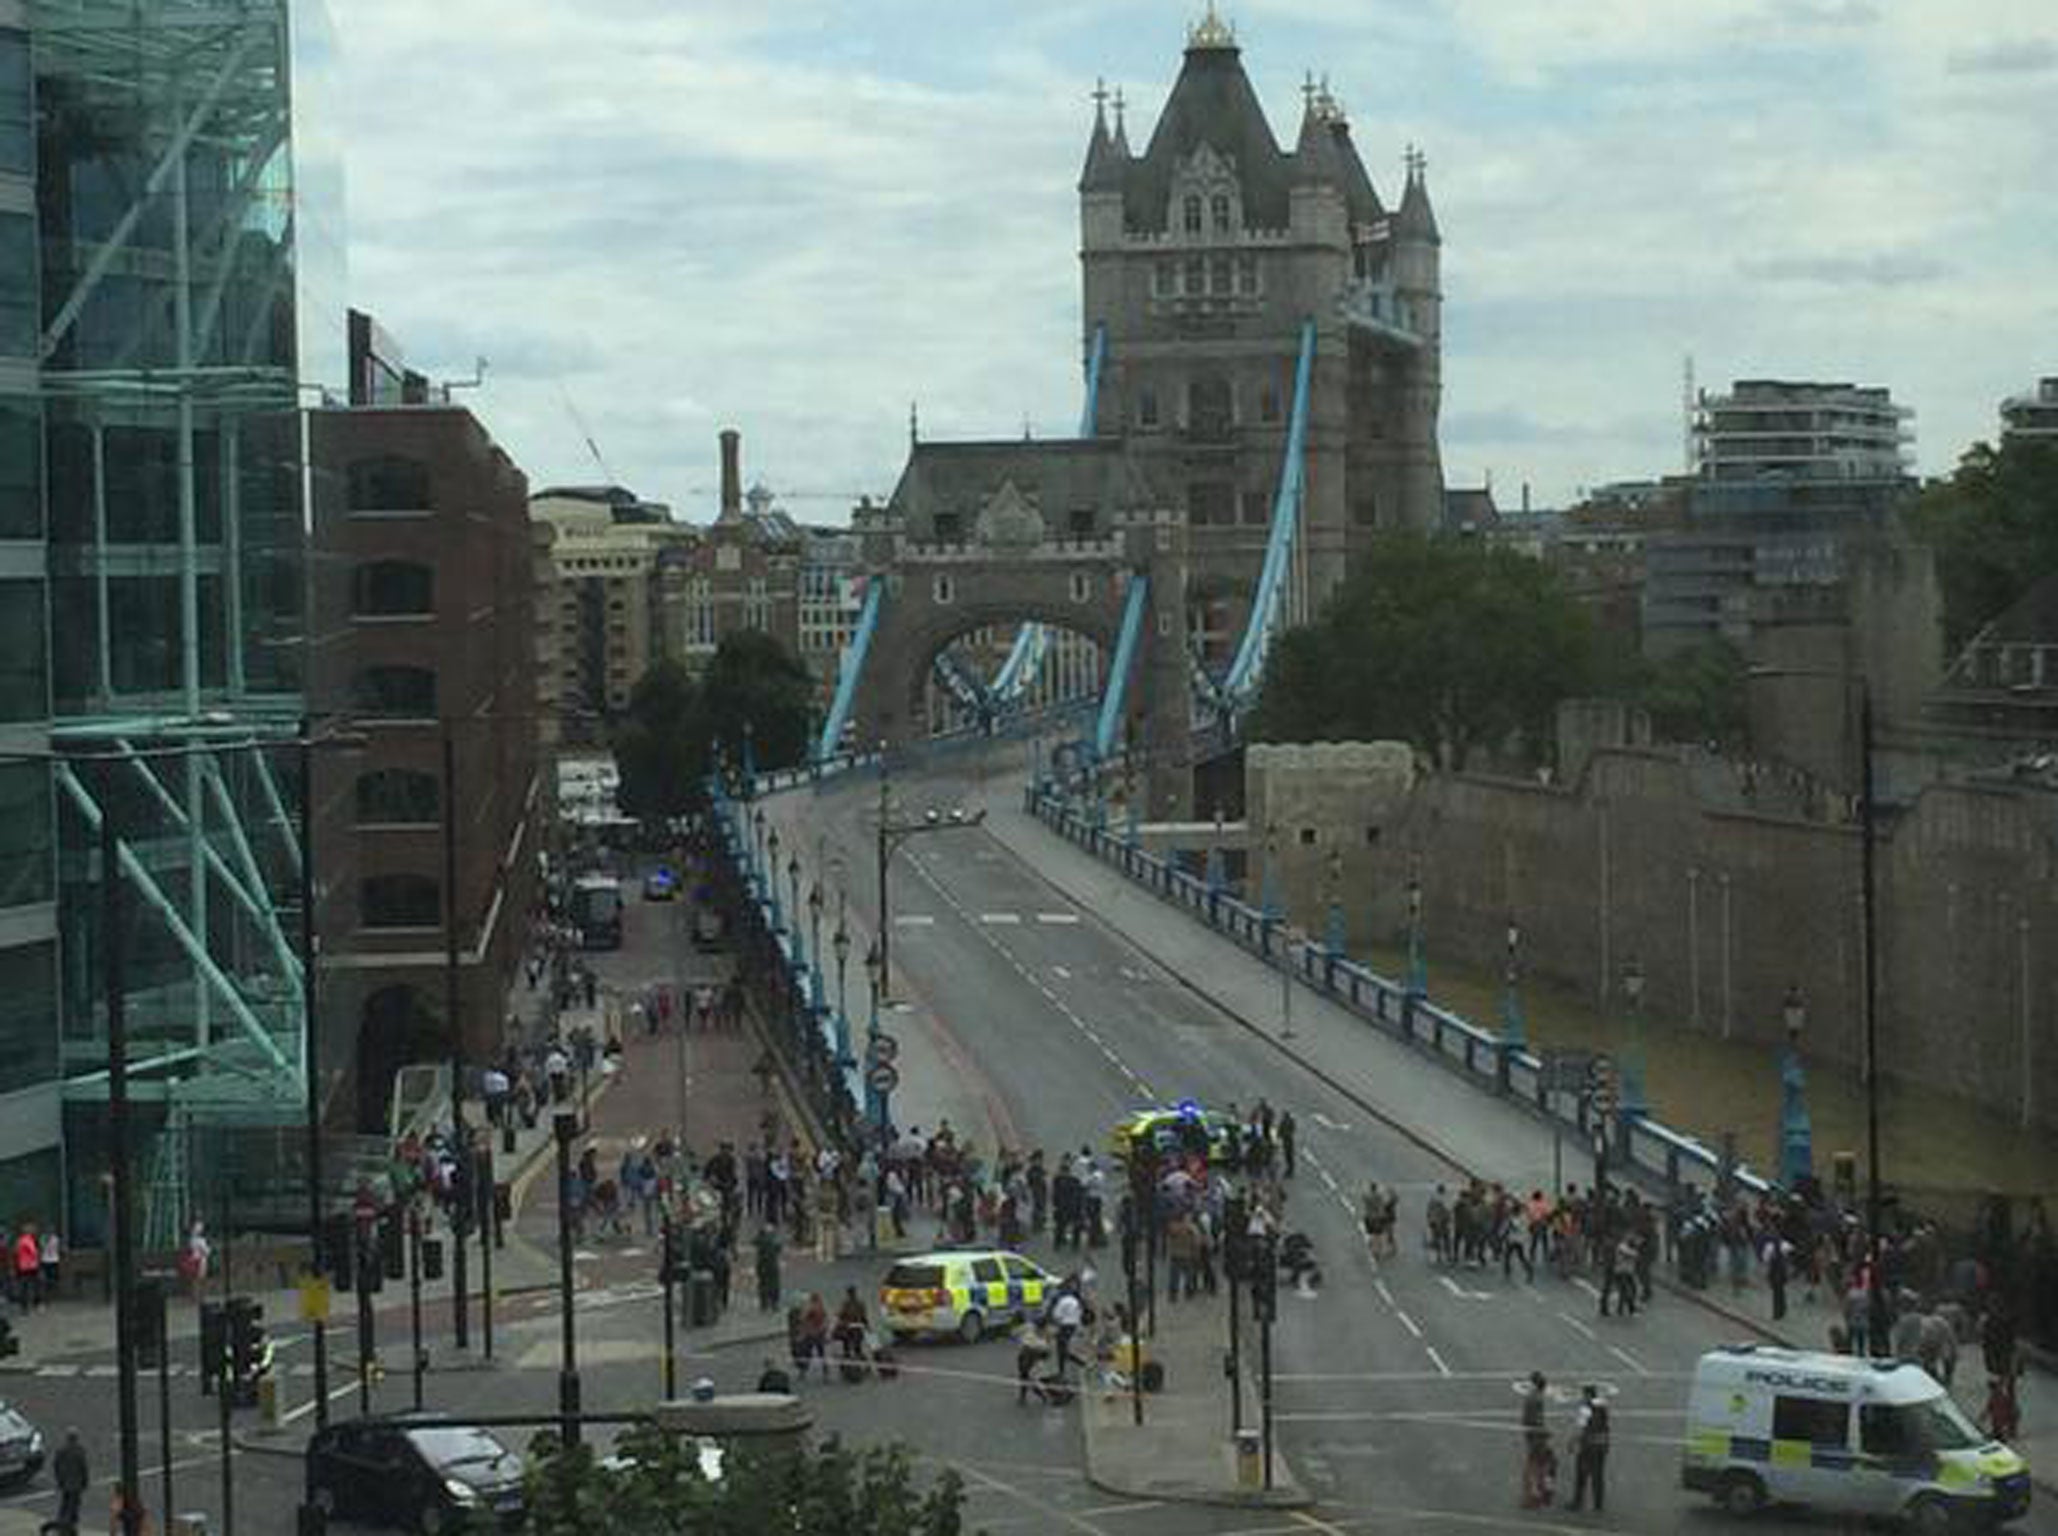 Tower Bridge was closed due to a suspect package